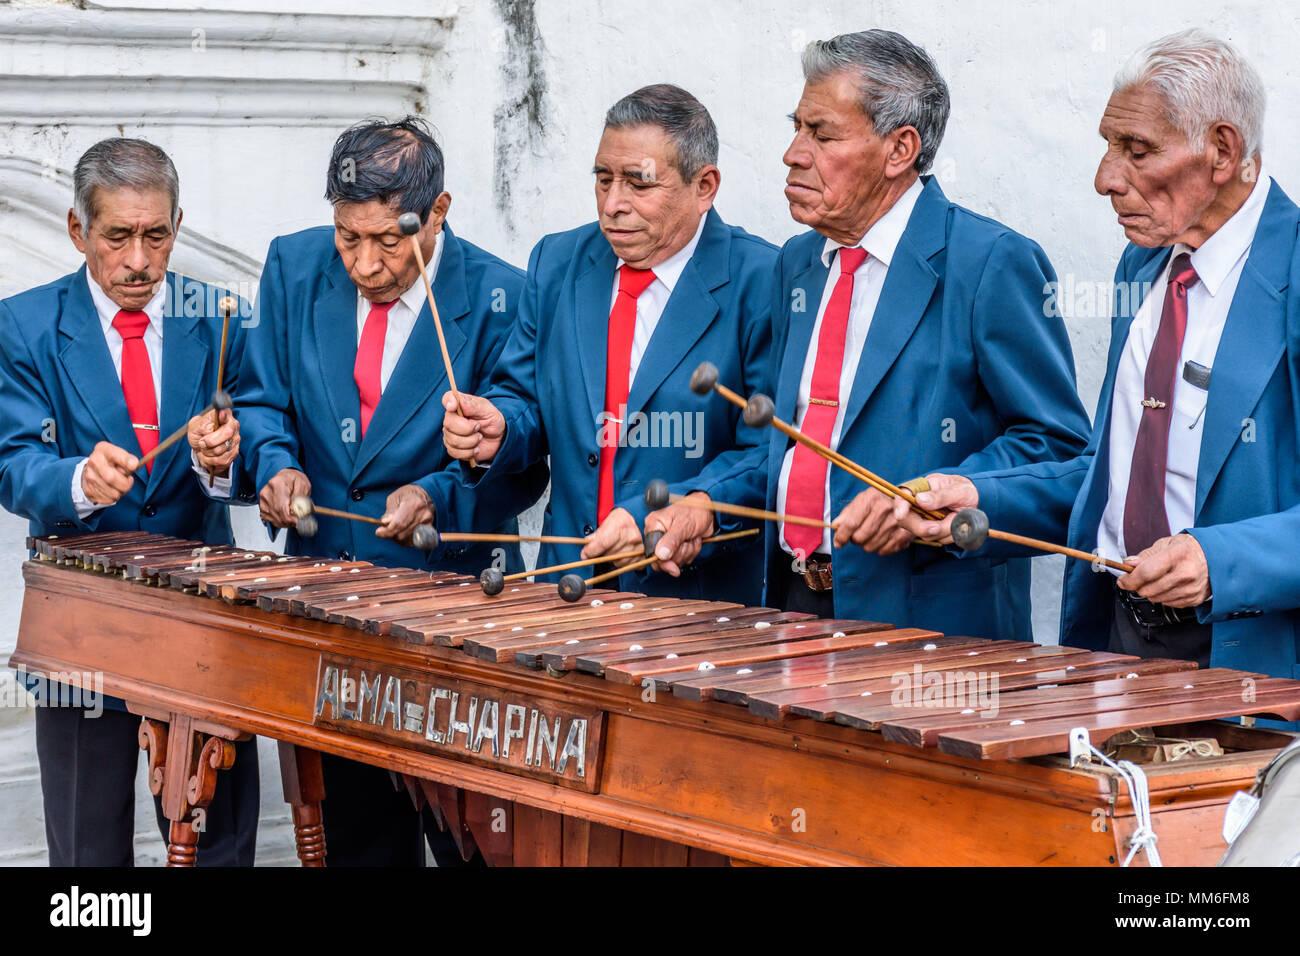 Cuidad Vieja, Guatemala - December 7, 2017: Local marimba band plays outside church celebrating Our Lady of the Immaculate Conception Day. Stock Photo